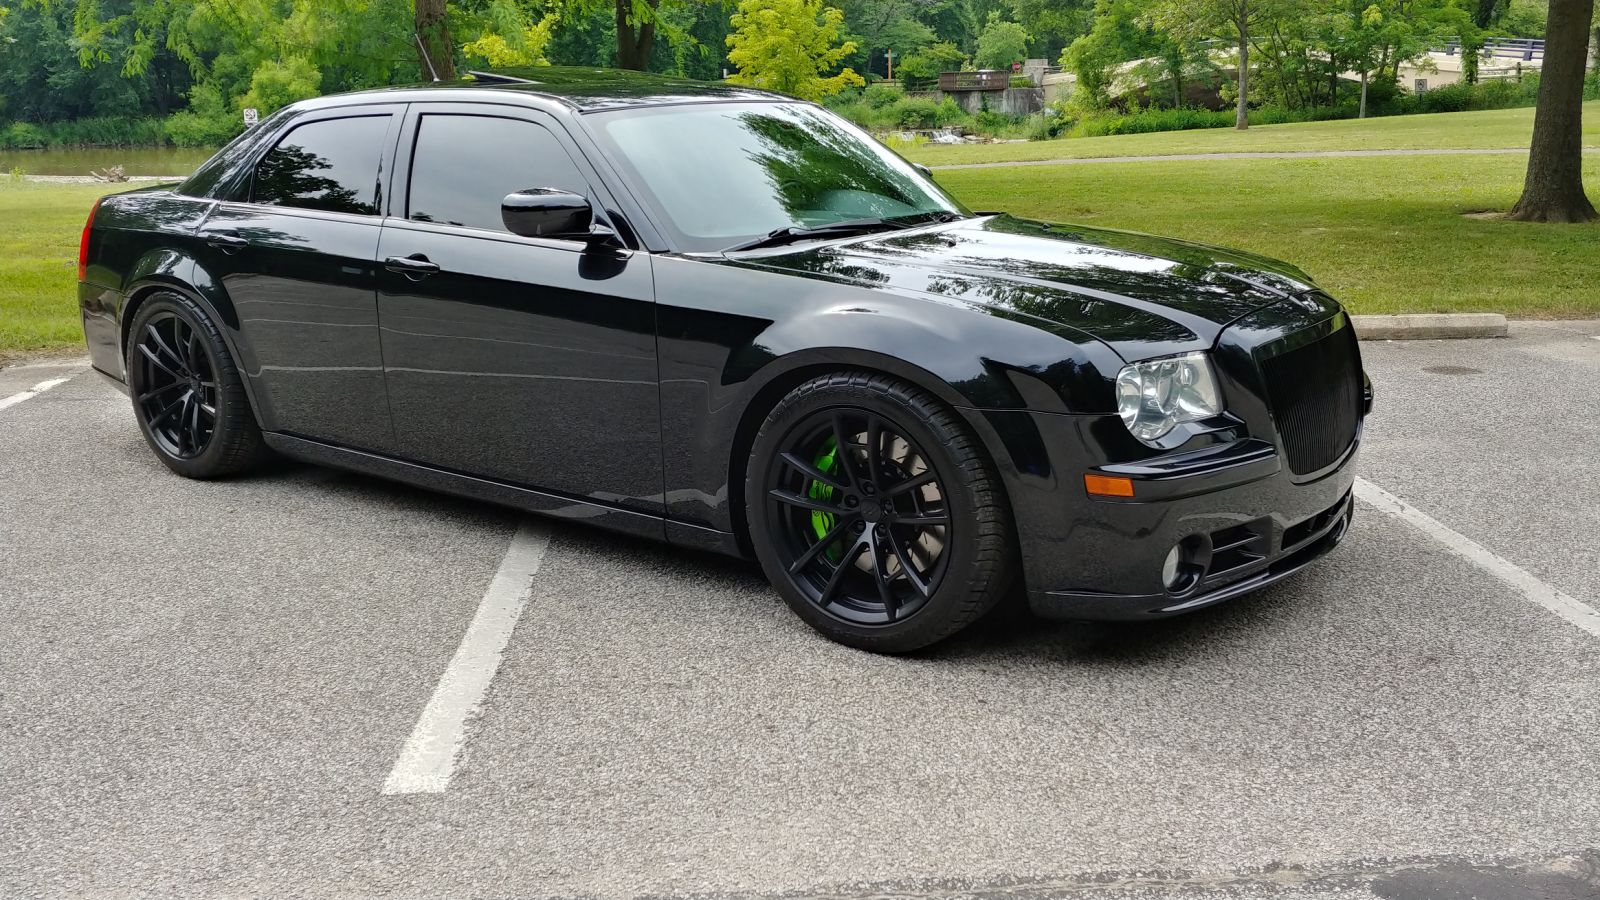 Whats the fastest chrysler 300